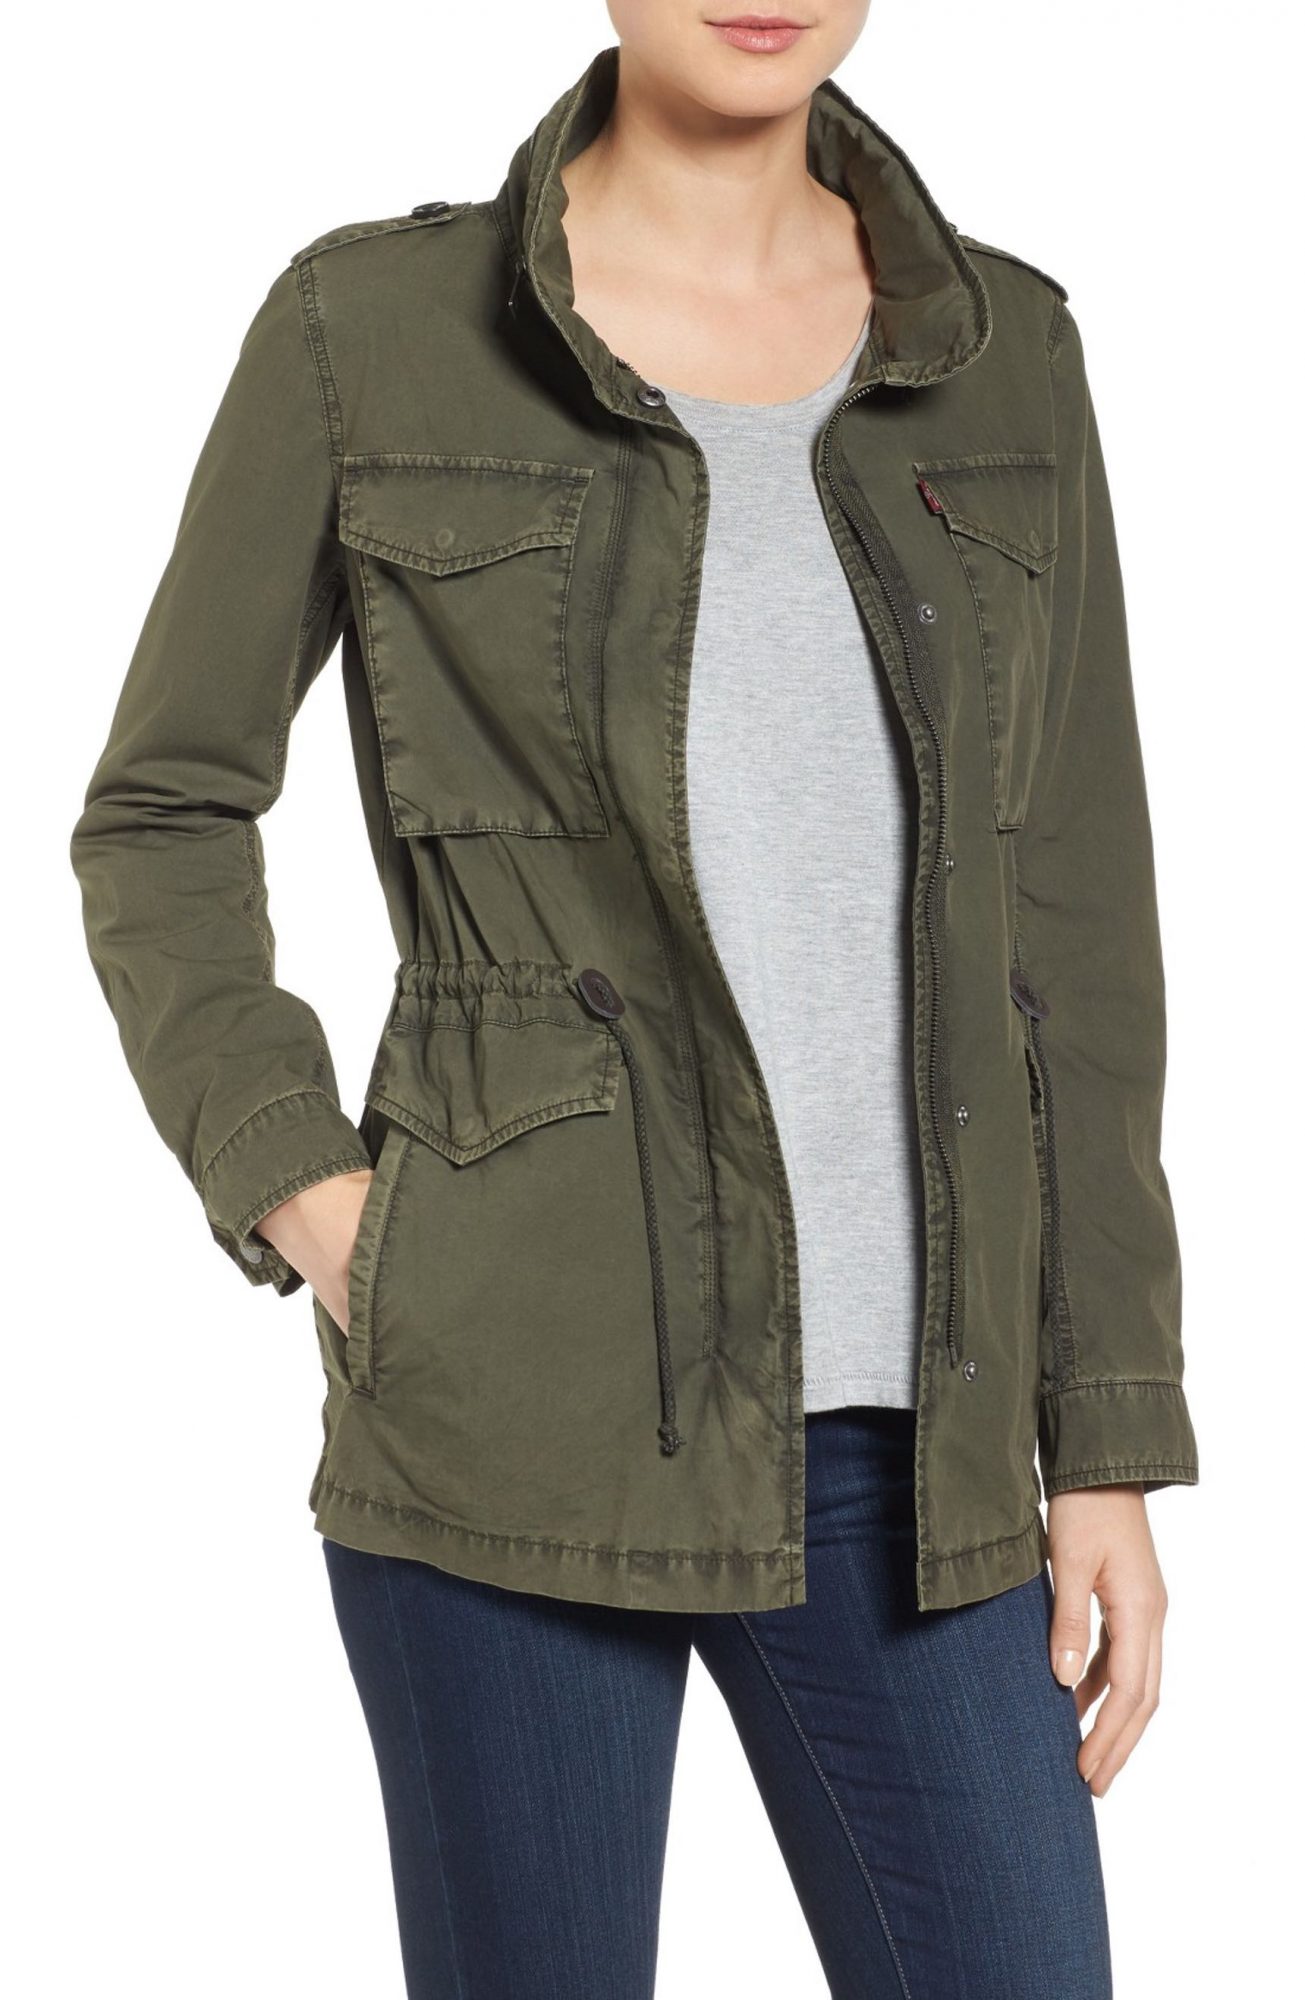 We found 4 affordable versions of Emma Roberts' military-style jacket ...